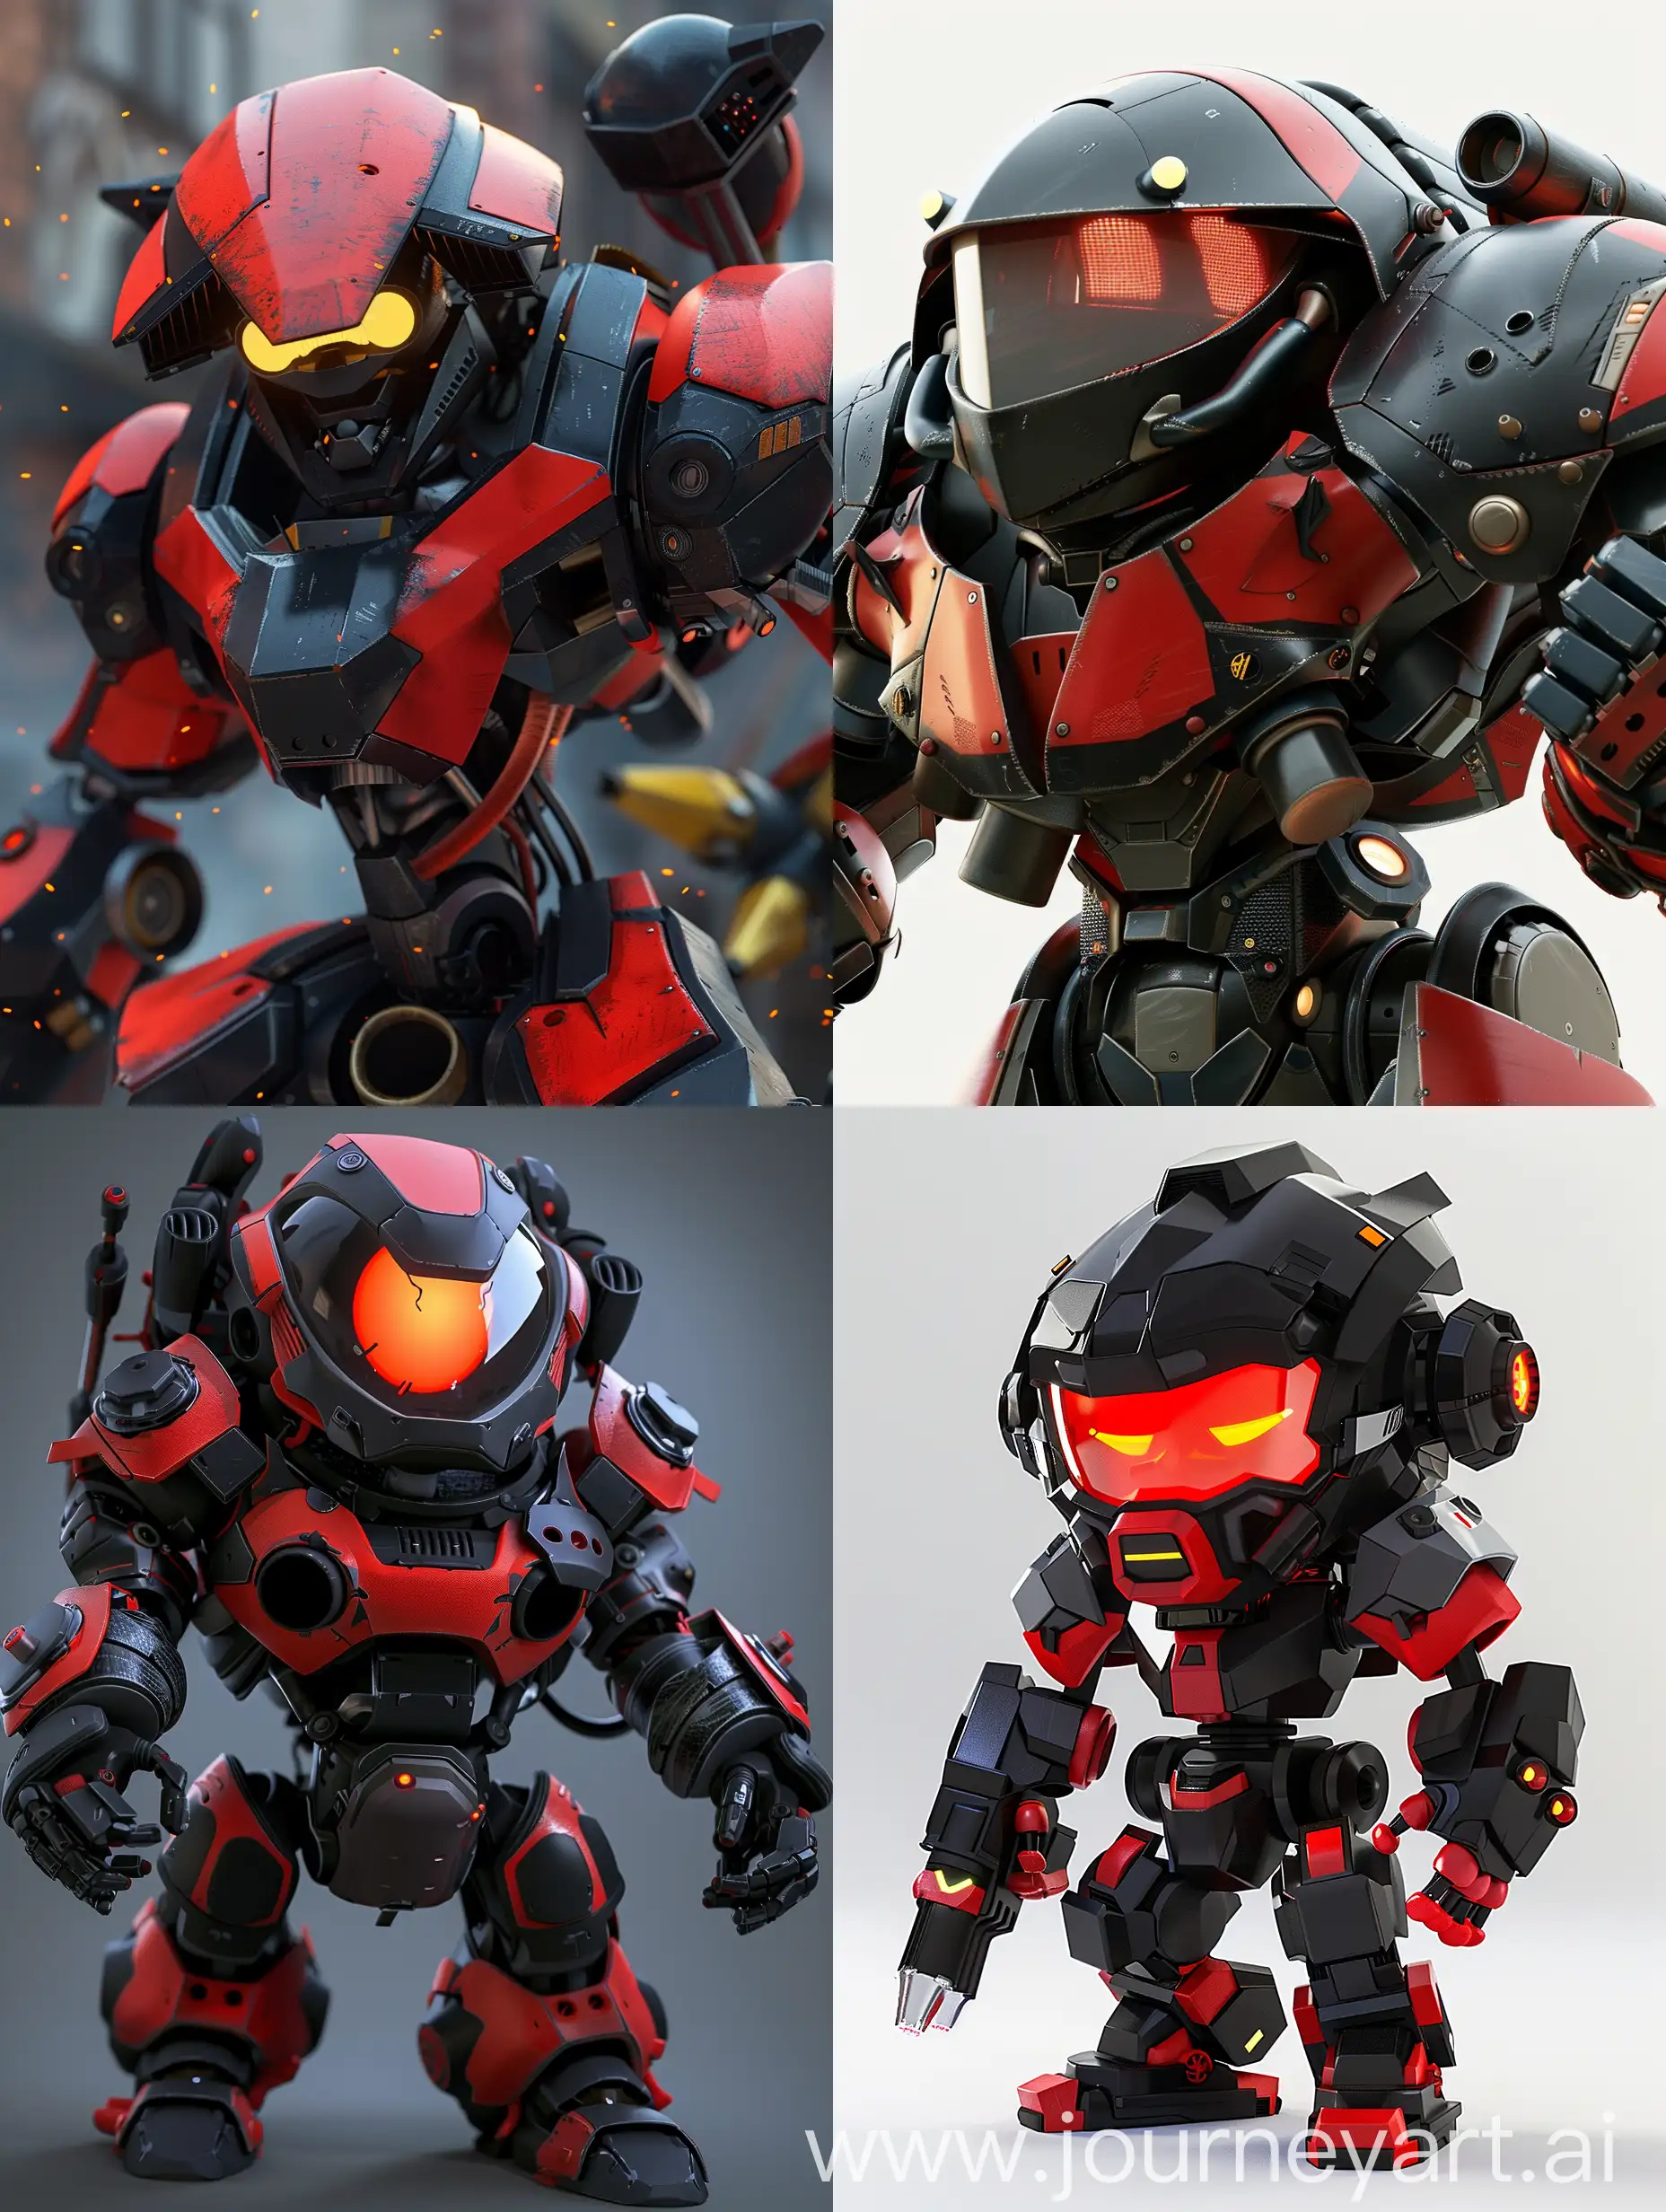 Children's Cartoon Style, Disney, Pixar, Nickelodeon, 3D, Unrealistic Proportions, Robot, Mecha, Menacing, Brutal, Technological, Armored Body, Red and Black Colors, Disproportional Sizes of Parts, Angular Shapes, Large Glowing Front Visor, Giant Guns on Arms, Rocket Launchers, Combat Stance, Close View